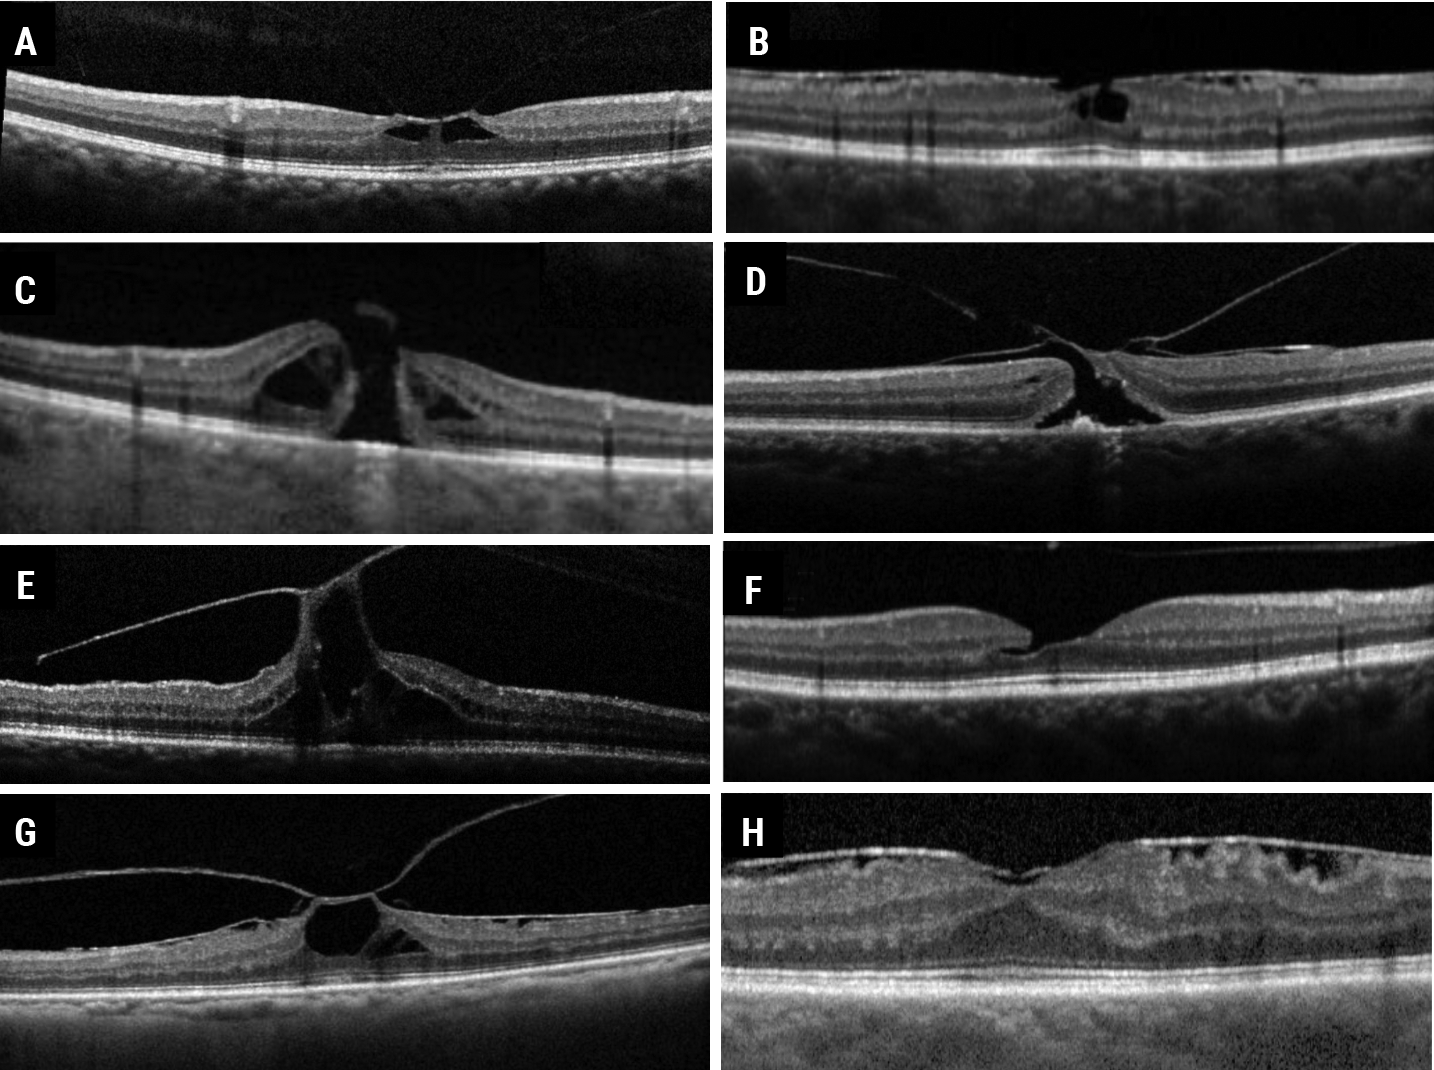 Fig. 17. VMT (A) taxonomy leading to one of the following potential clinical courses: epiretinal or epimacular membrane and lamellar macular hole (B), full-thickness macular hole (C), full-thickness macular hole with epimacular membrane (D), persistent VMT combined with macular hole (E), or released with lamellar macular hole (F), or persistent with epimacular membrane and macular hole (G) or epimacular membrane (H).